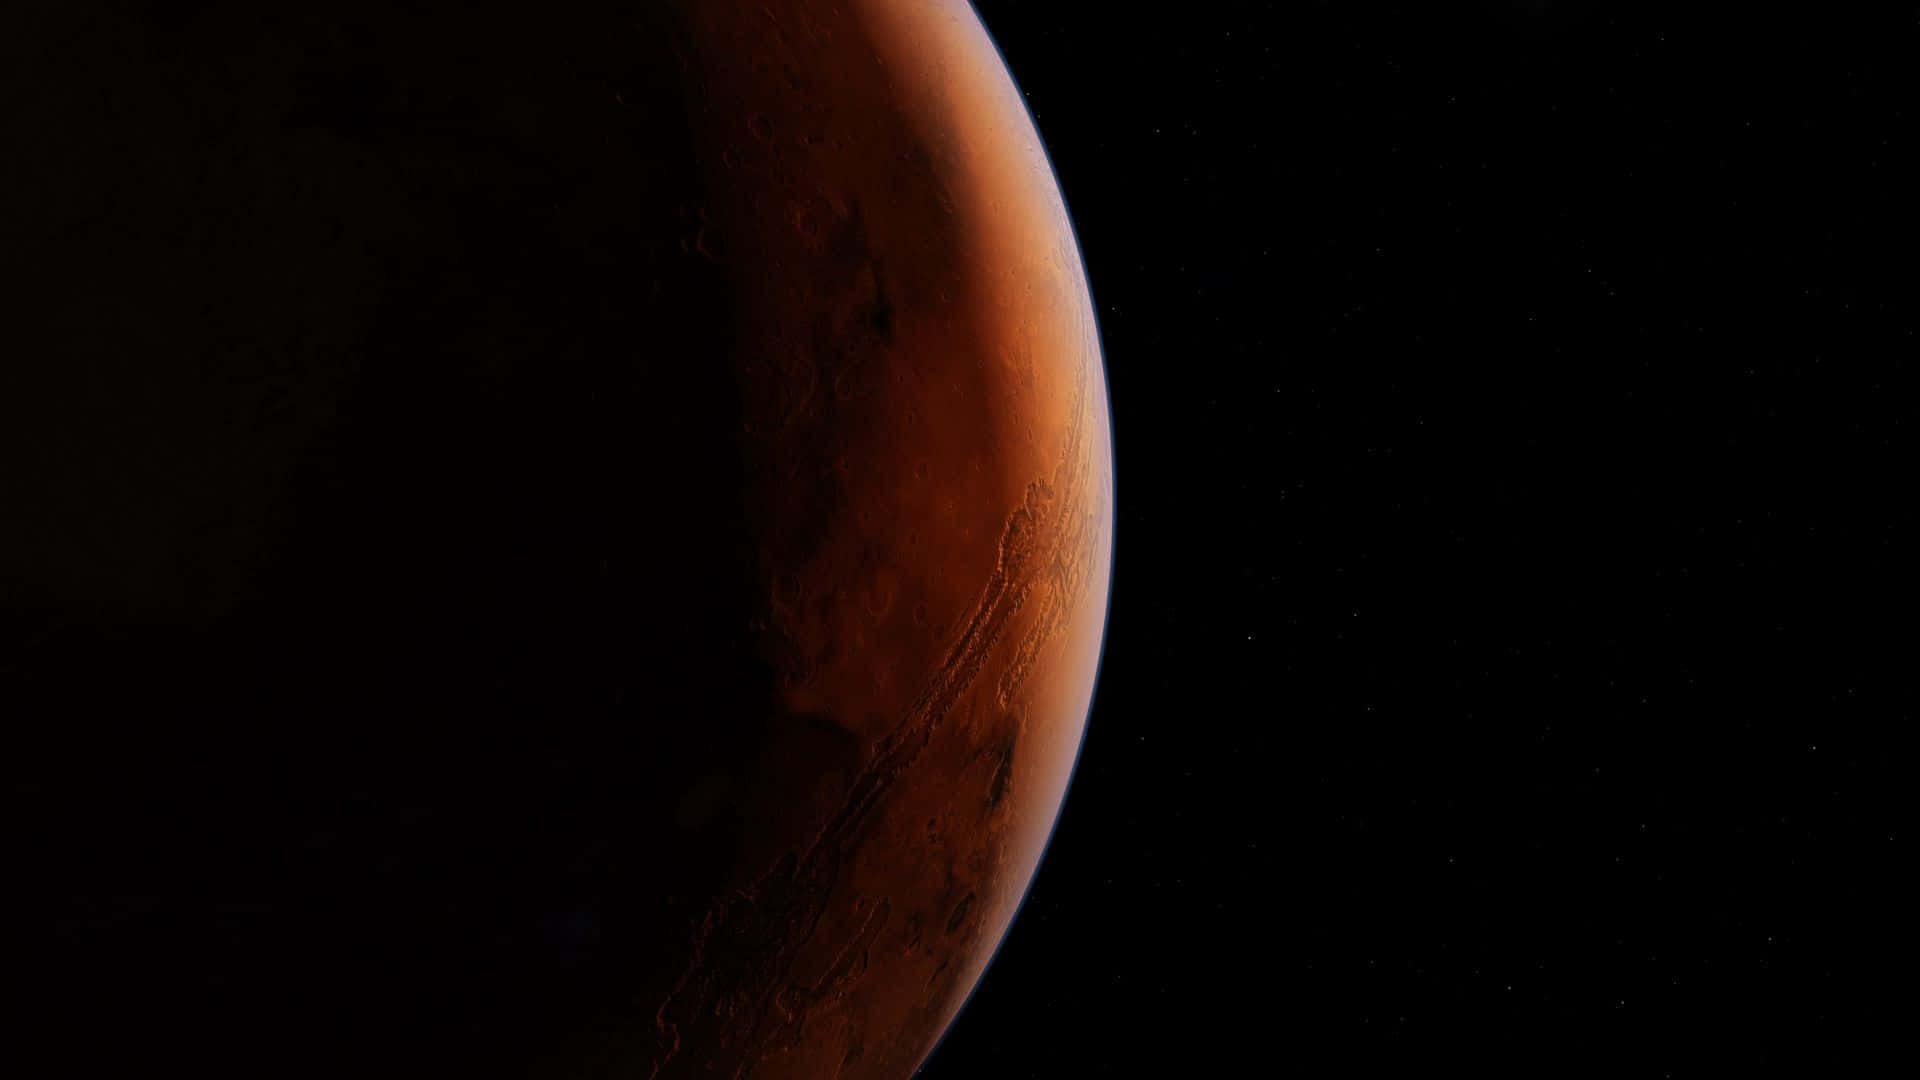 The Red Planet - Mars